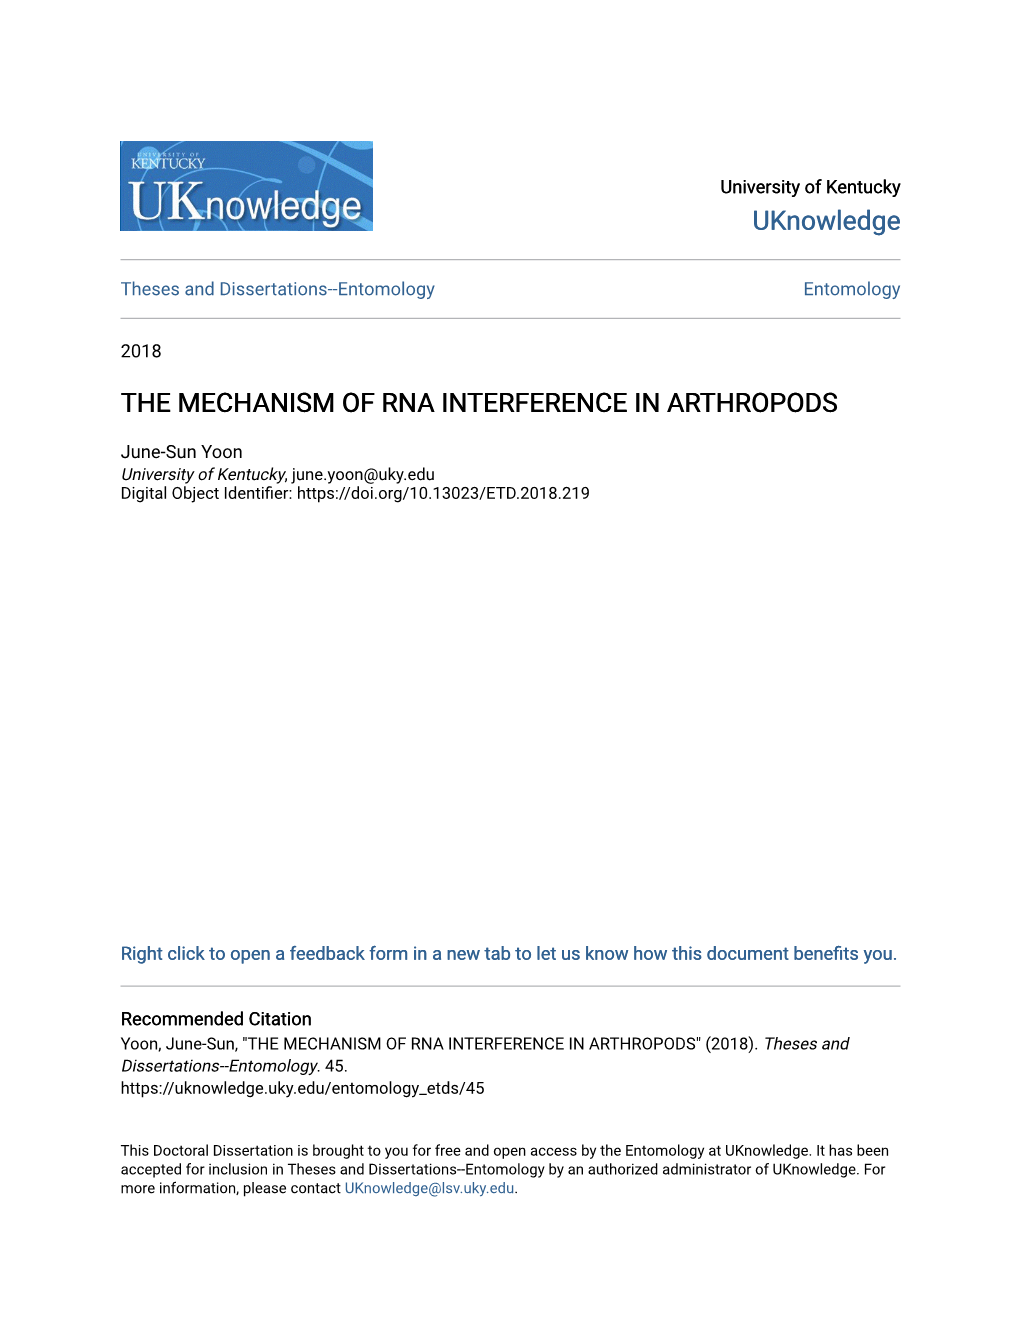 The Mechanism of Rna Interference in Arthropods